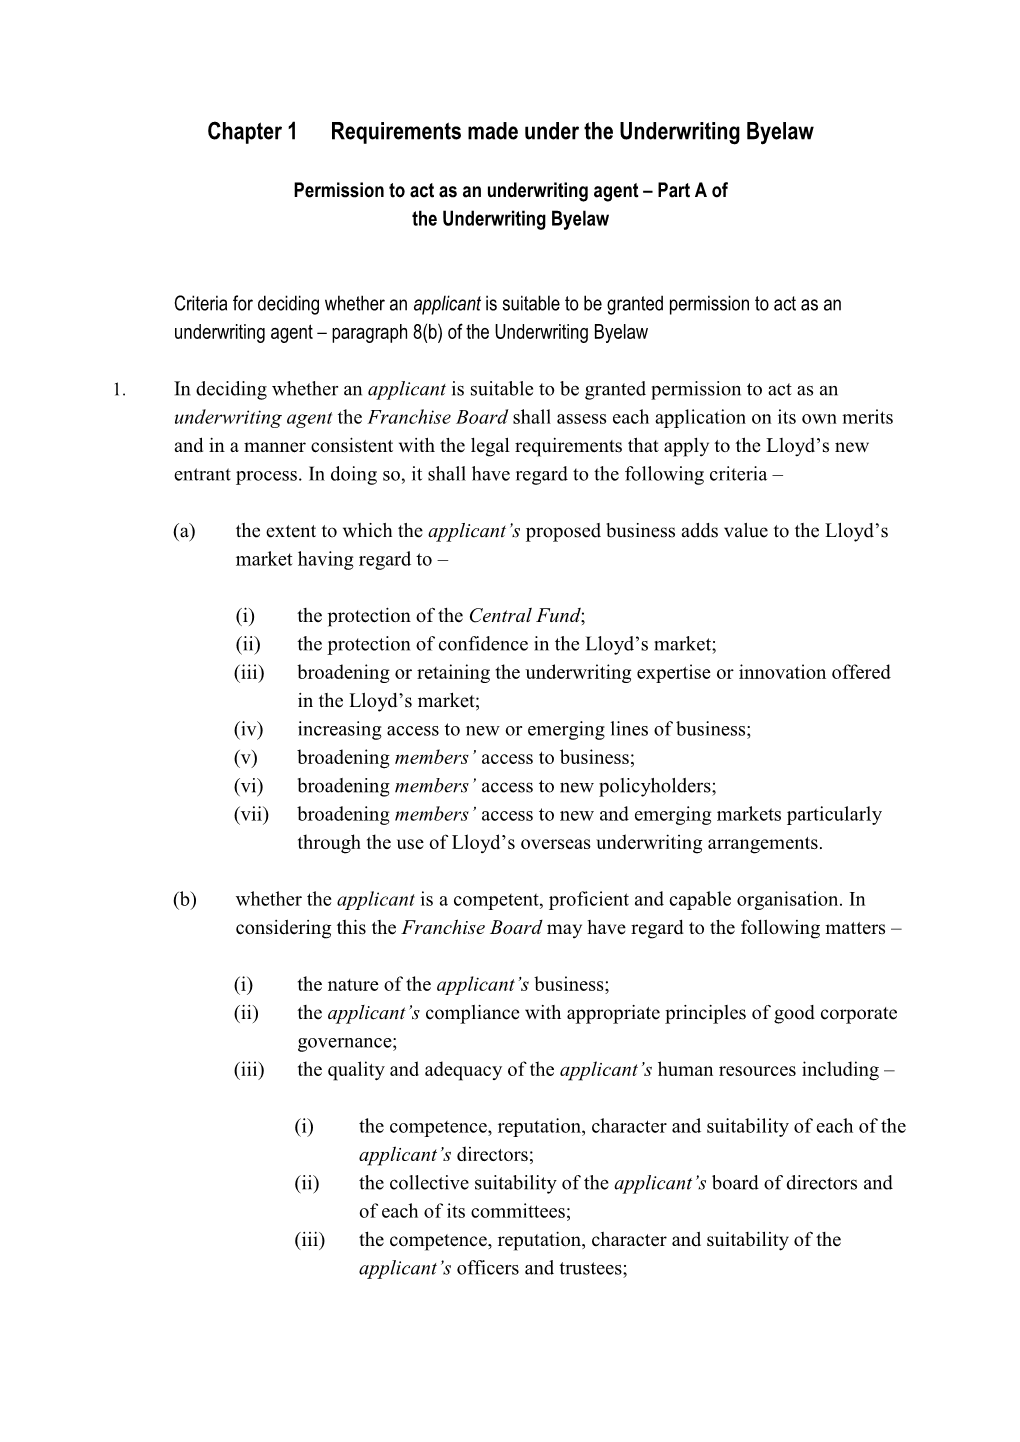 Chapter 1 Requirements Made Under the Underwriting Byelaw